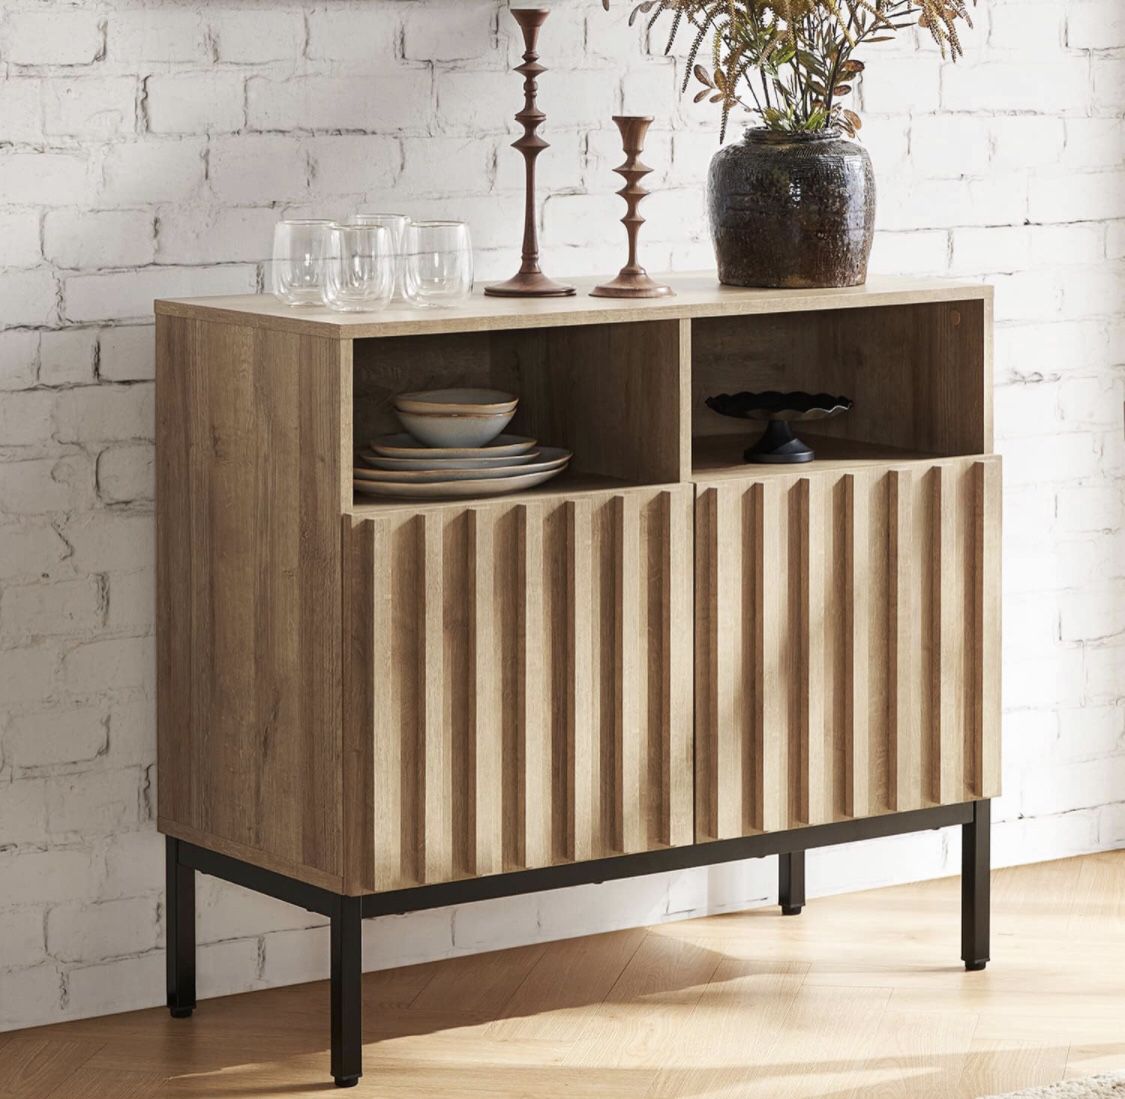 Storage Cabinet, Modern Rustic Industrial Buffet Sideboard, Accent Console Credenza, Fluted Panel Doors, Adjustable Shelves, Sturdy Metal Legs with Le